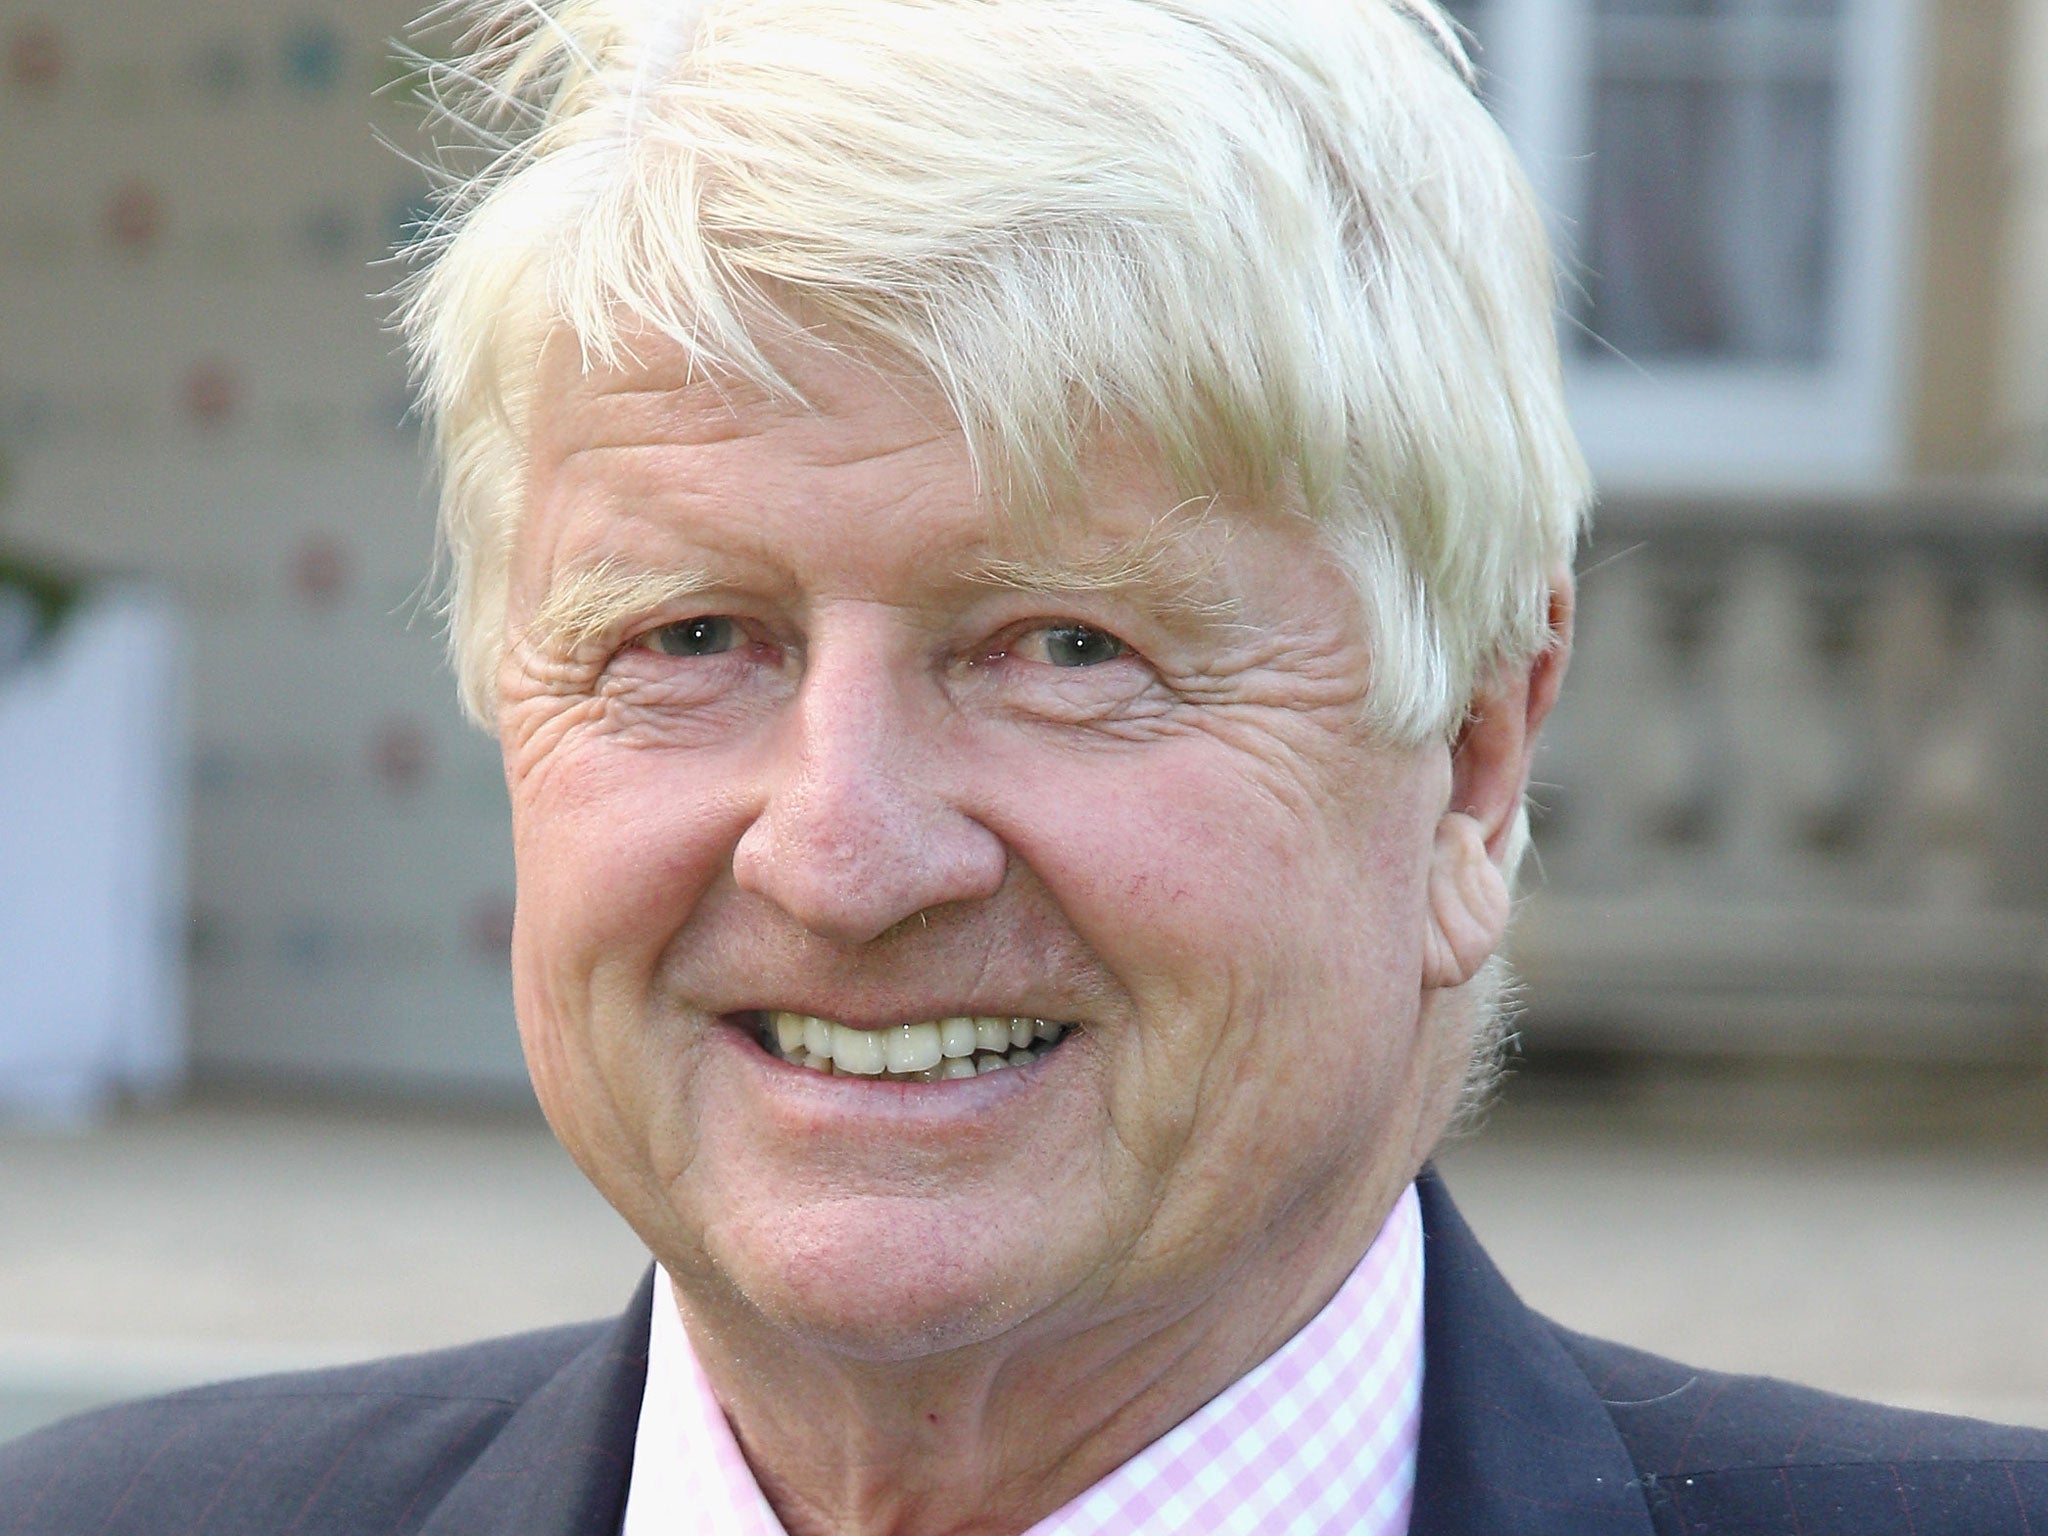 Stanley Johnson seems to be at odds with his son's immigration policy